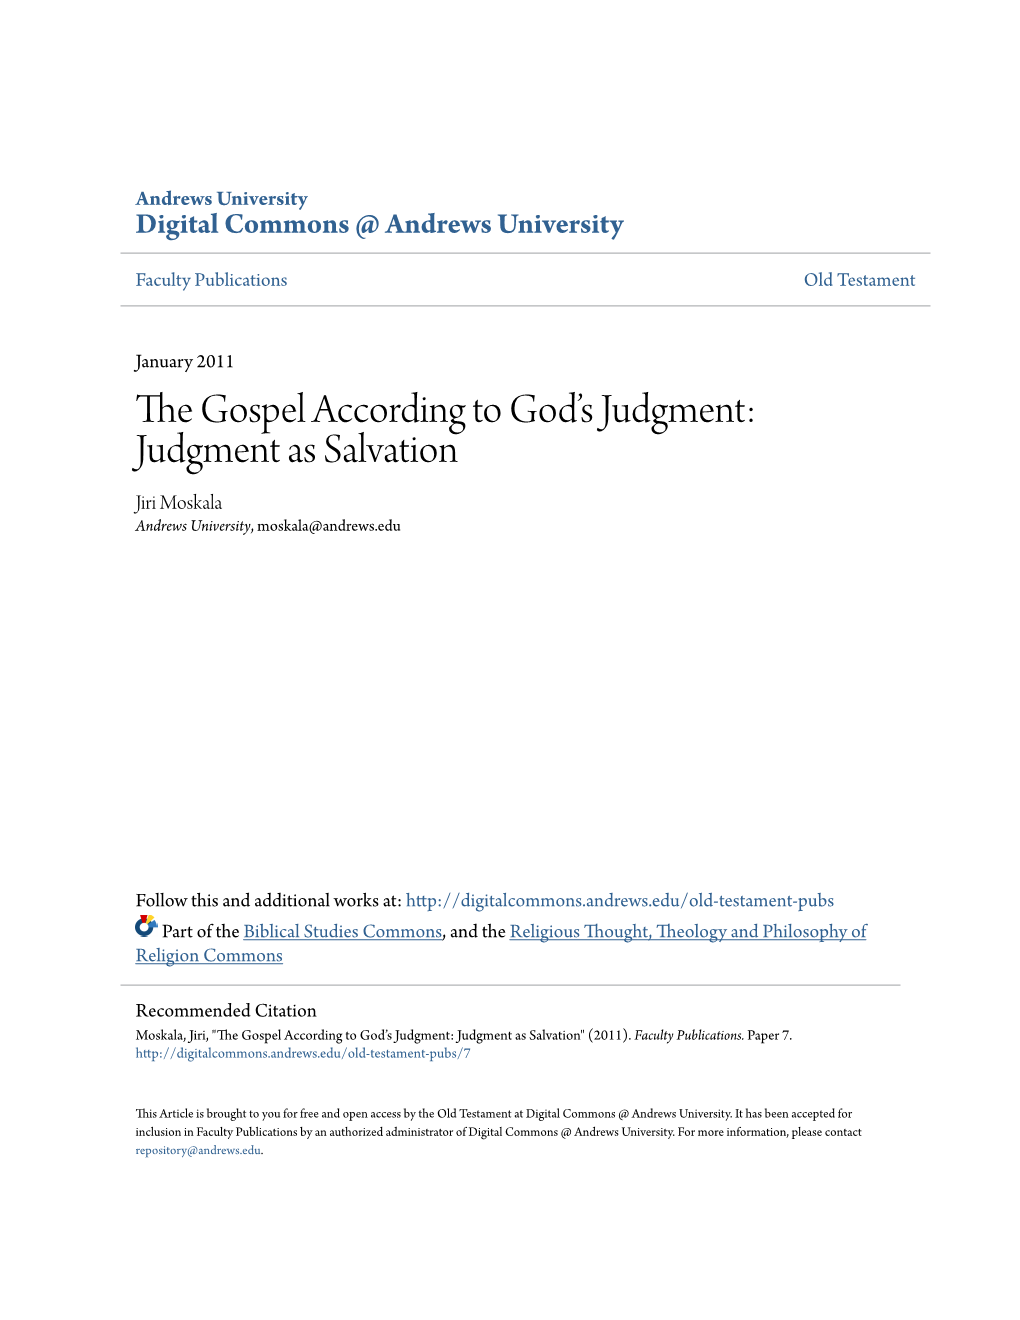 The Gospel According to God's Judgment: Judgment As Salvation